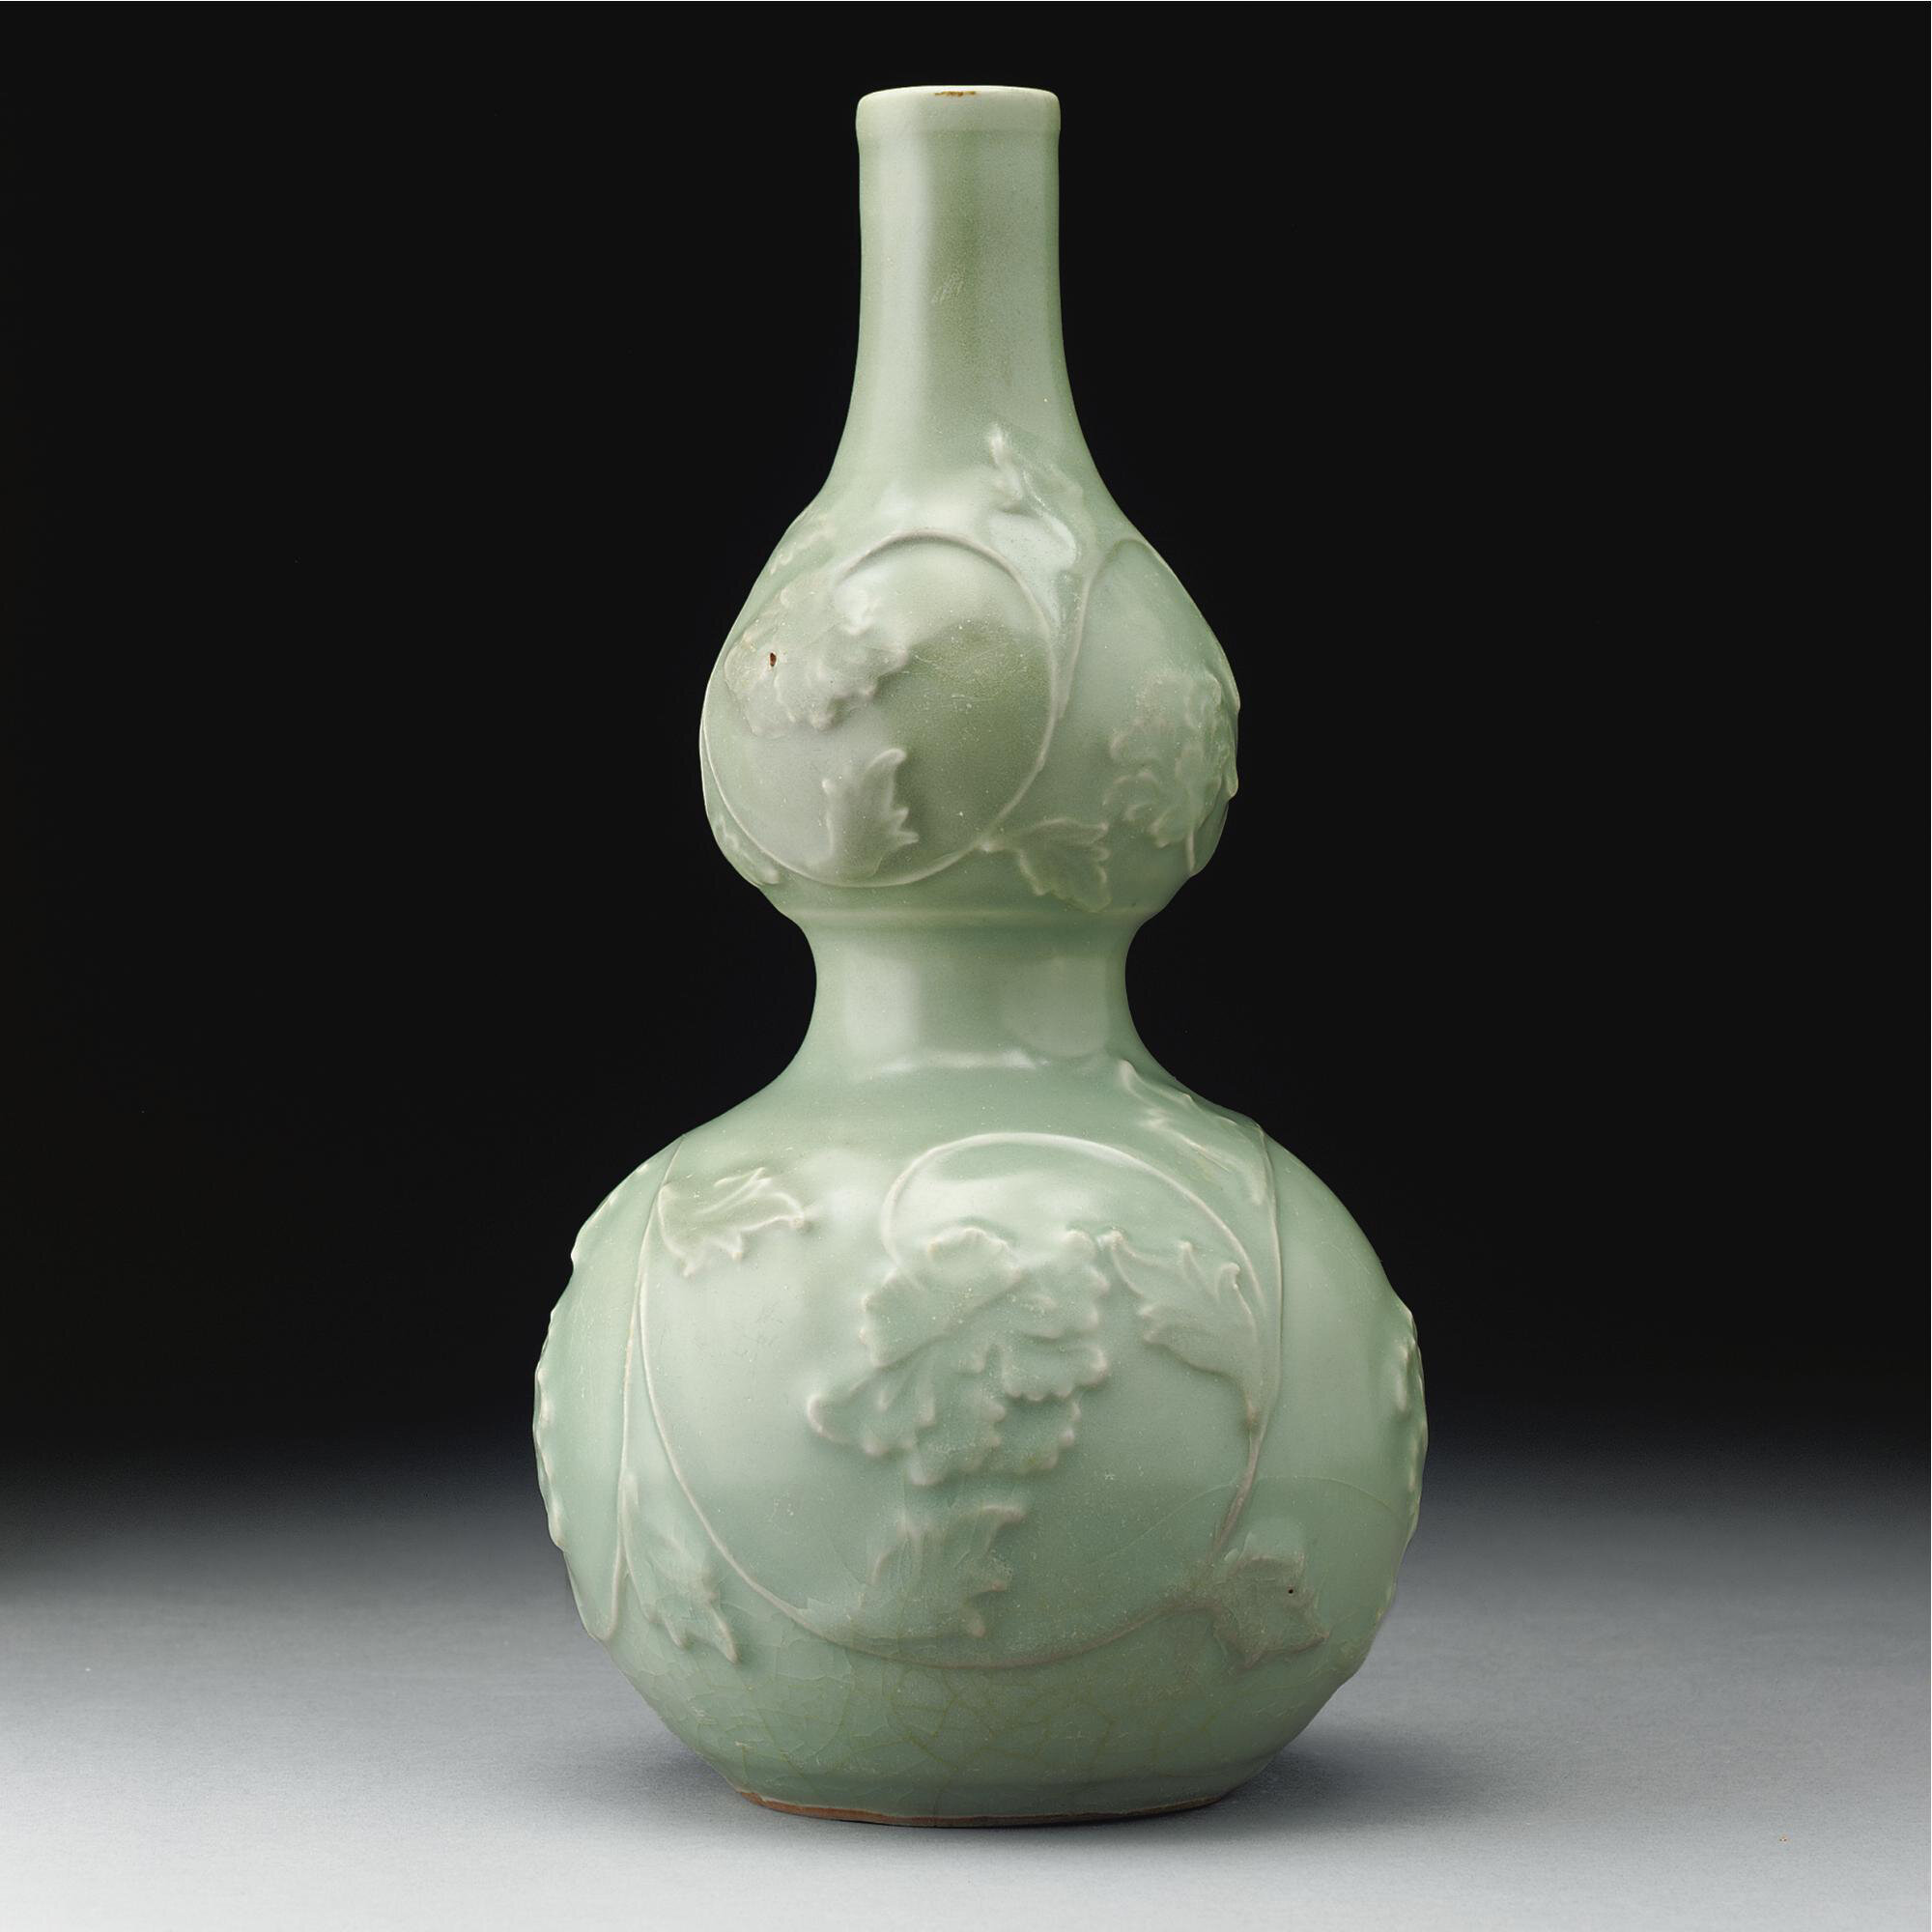 A rare 'Longquan' celadon double-gourd vase with applied decoration, Yuan dynasty (1279-1368)